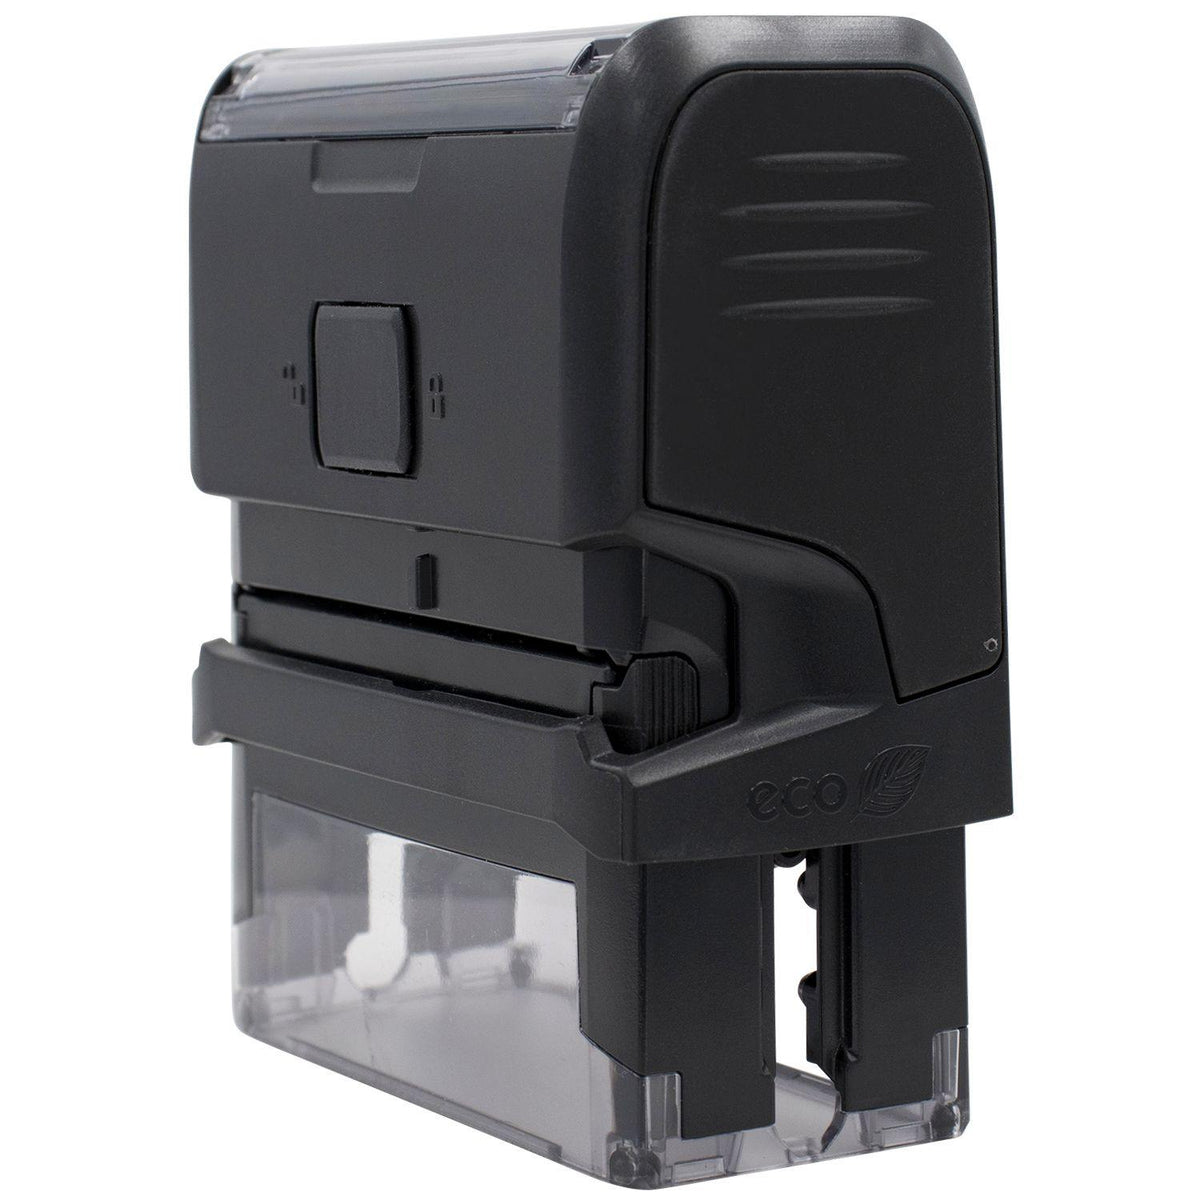 Self-Inking Unclaimed Stamp - Engineer Seal Stamps - Brand_Trodat, Impression Size_Small, Stamp Type_Self-Inking Stamp, Type of Use_Postal &amp; Mailing